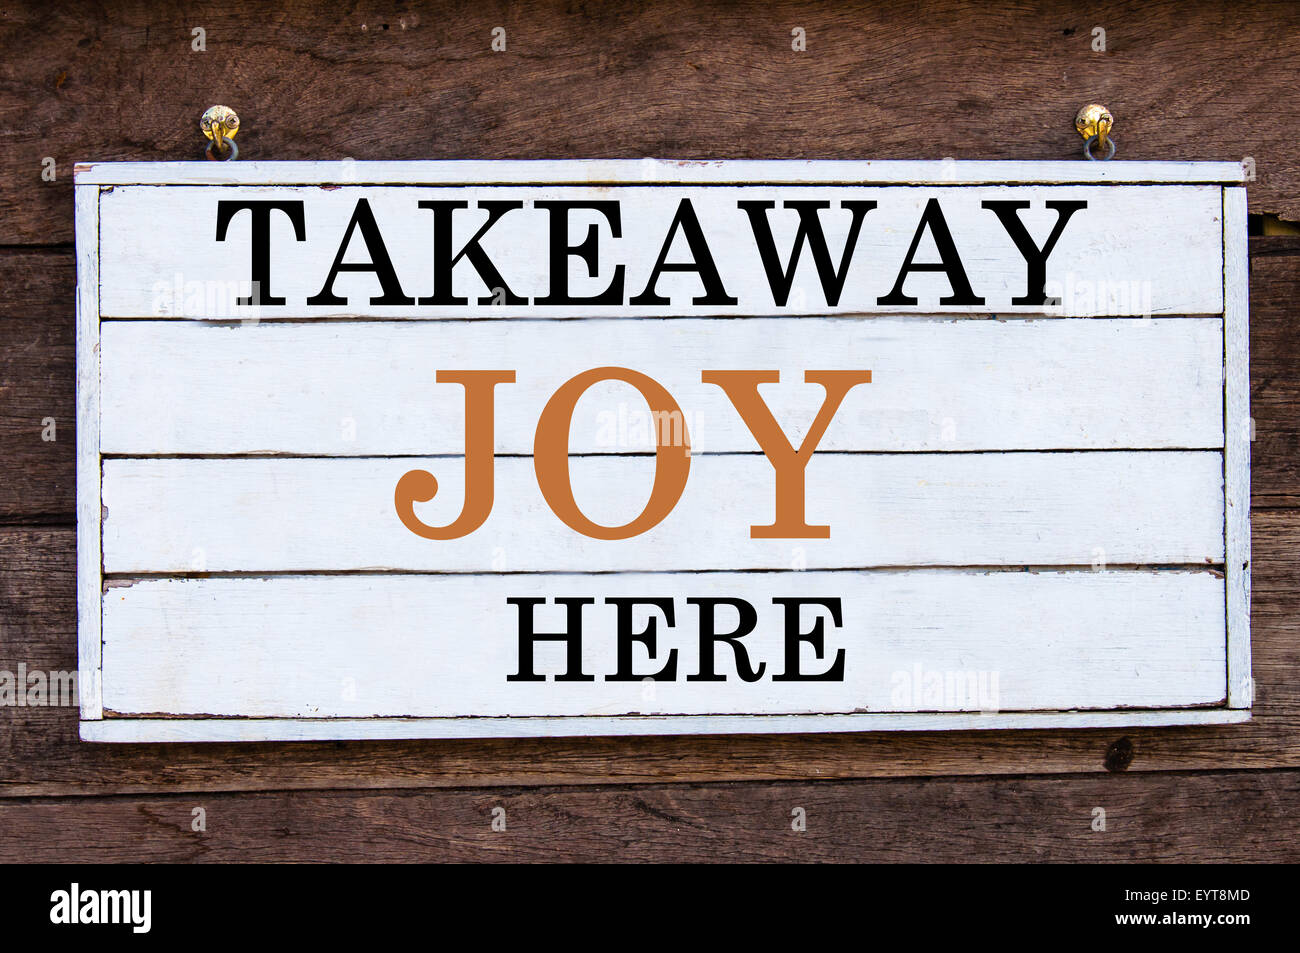 Takeaway Joy Here Inspirational message written on vintage wooden board. Motivation concept image Stock Photo